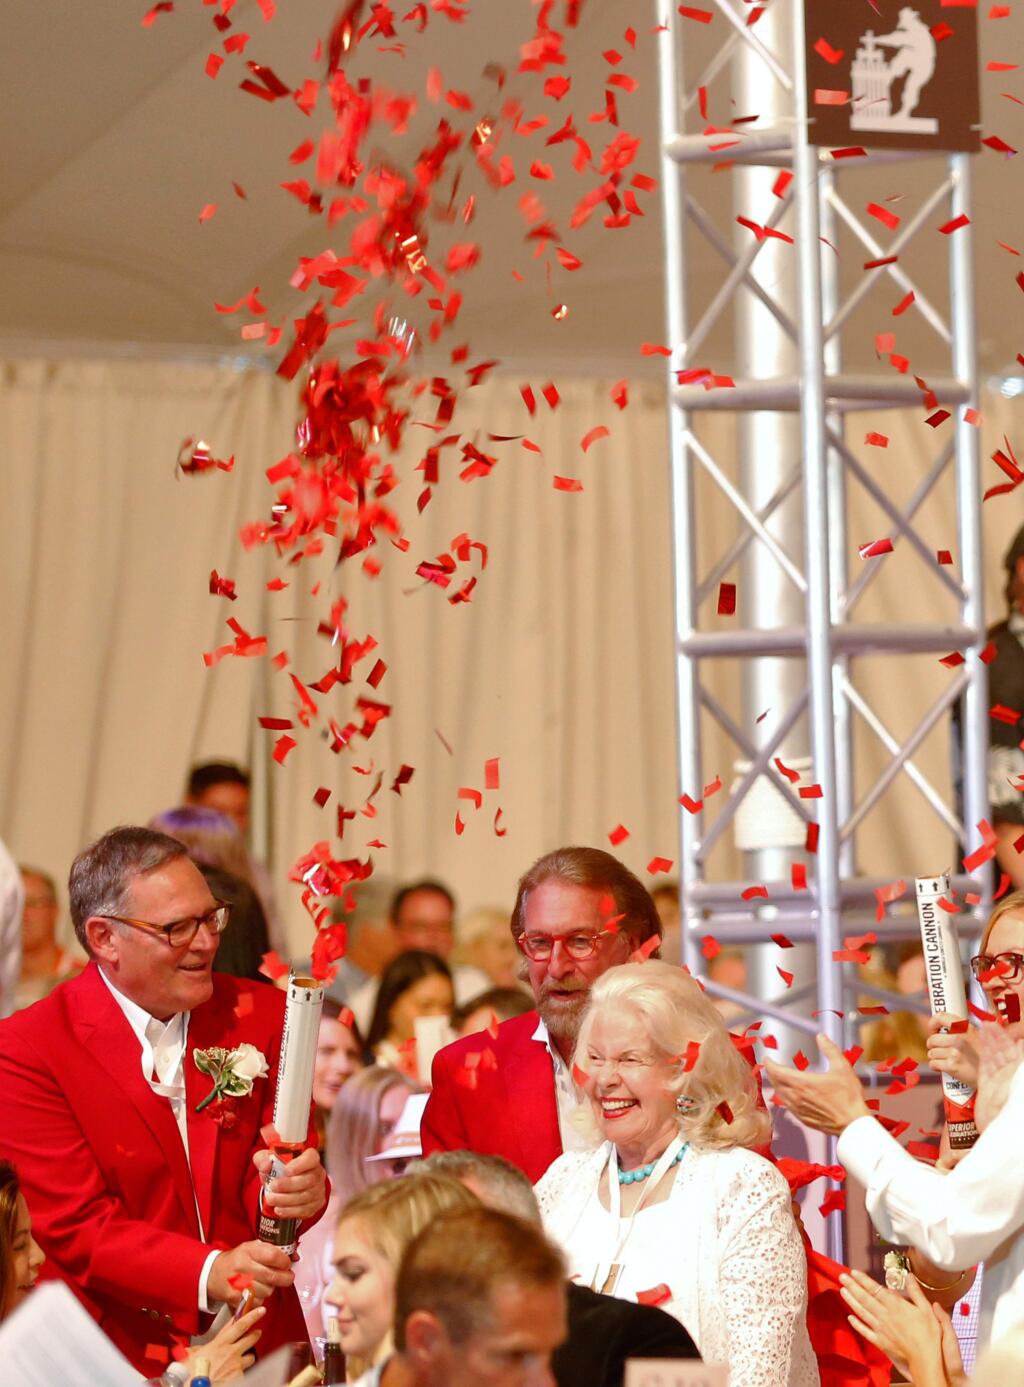 Michael Silacci, left, co-chair of the Hoopla Committee and winemaker at Opus One, shoots confetti in the air to celebrate with a winning bidder during Auction Napa Valley at Meadowood in St. Helena, California on Saturday, June 4, 2016. (Alvin Jornada / The Press Democrat)